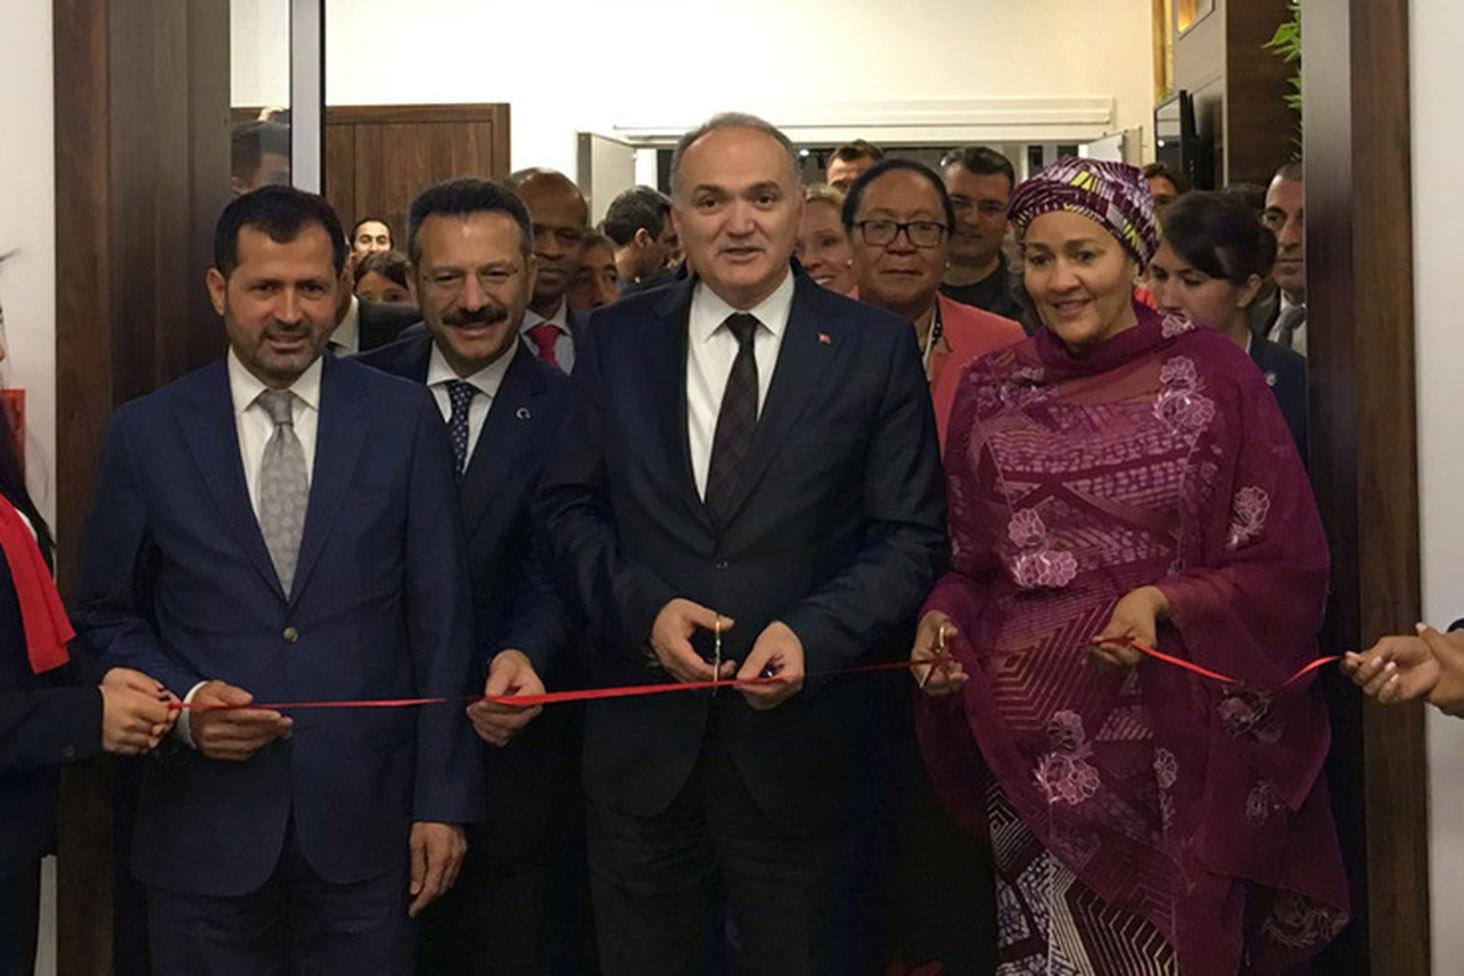 The UN Deputy Secretary-General, Amina Mohammed (right) and Faruk Özlü (centre), Minister of Science, Industry and Technology of Turkey inaugurate the Technology Bank.